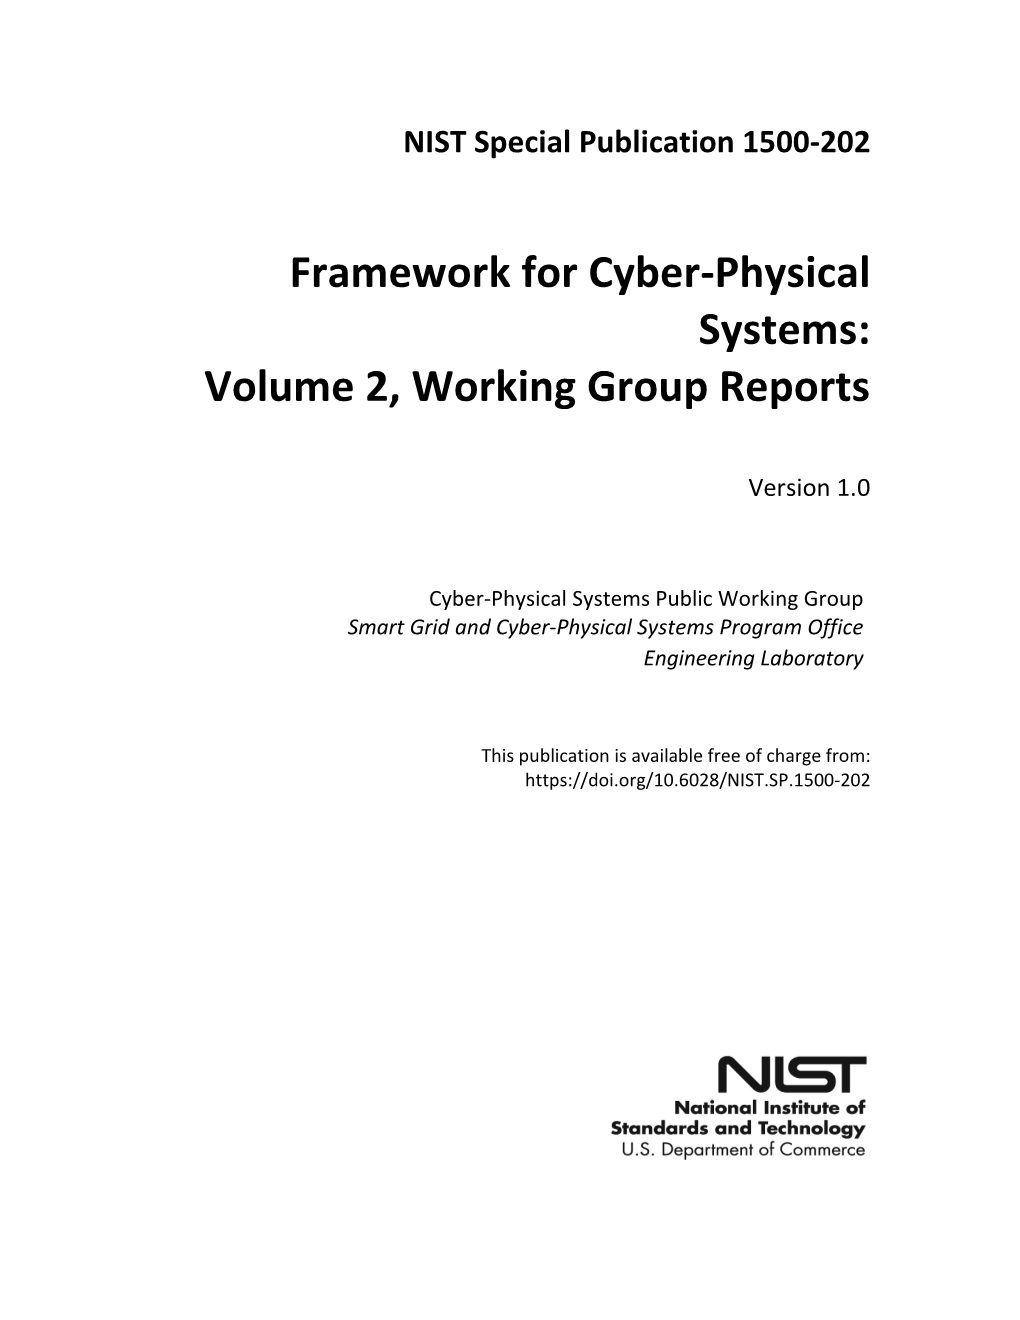 Framework for Cyber-Physical Systems: Volume 2, Working Group Reports